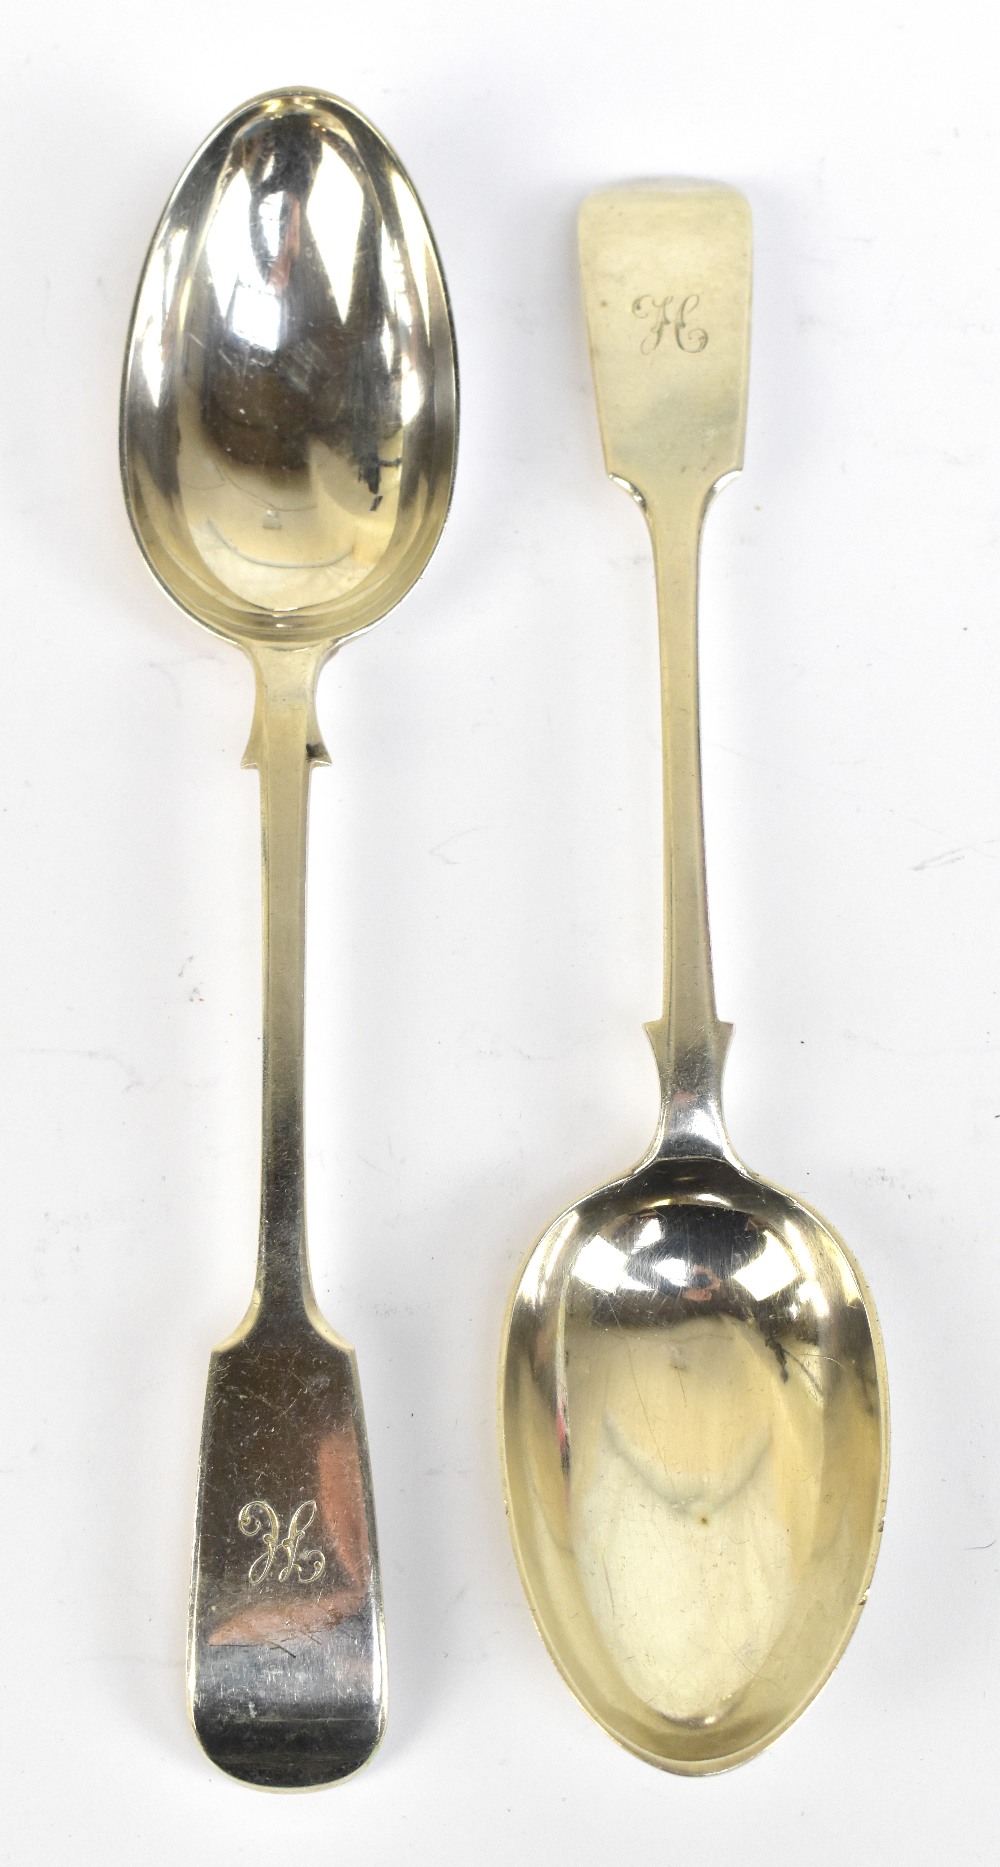 GEORGE MAUDSLEY JACKSON; a pair of Victorian hallmarked silver tablespoons, London 1886, with